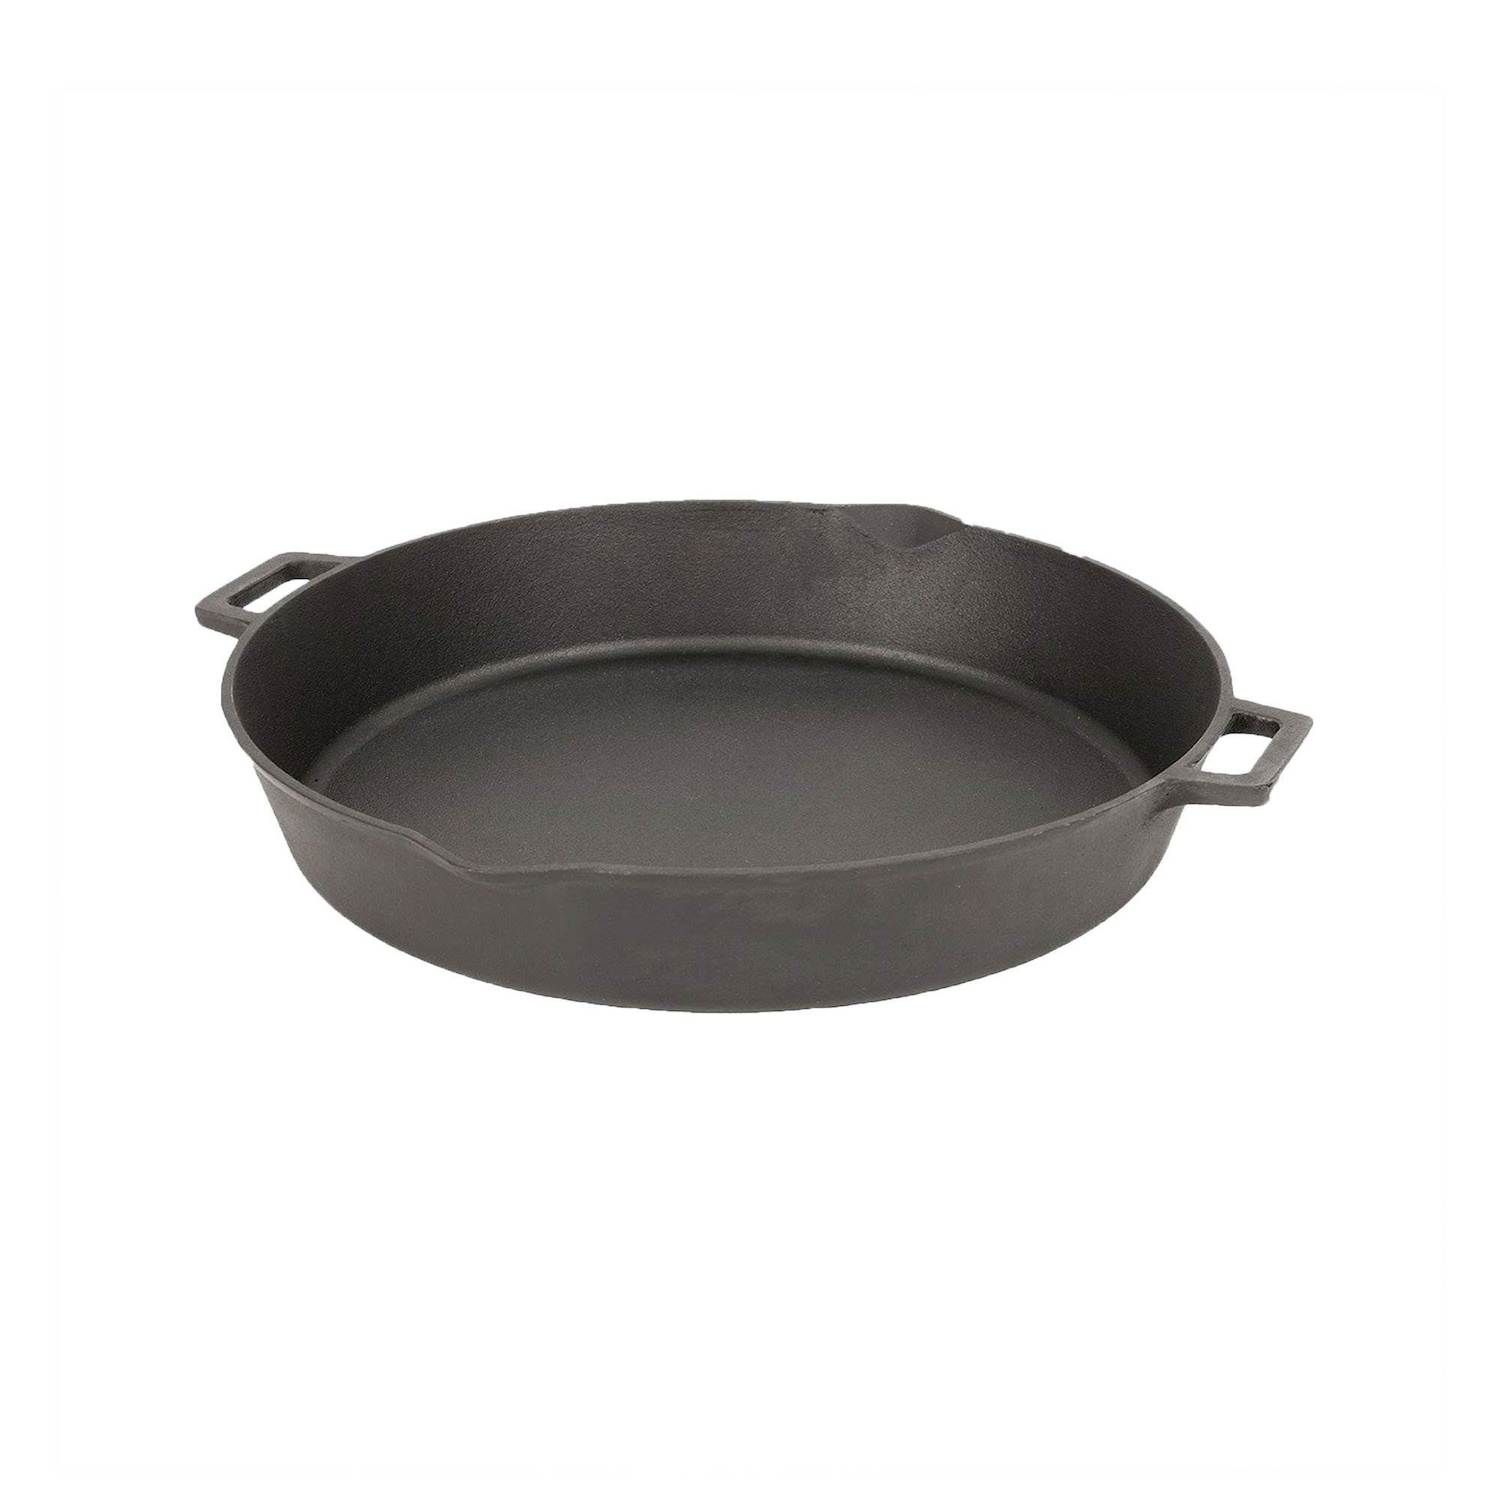 Bayou Classic 7402 2-qt Cast Iron Dutch Oven Features Flanged Camp Lid  Stainless Coil Wire Handle Grip Perfect To Use Over A Campfire To Prepare